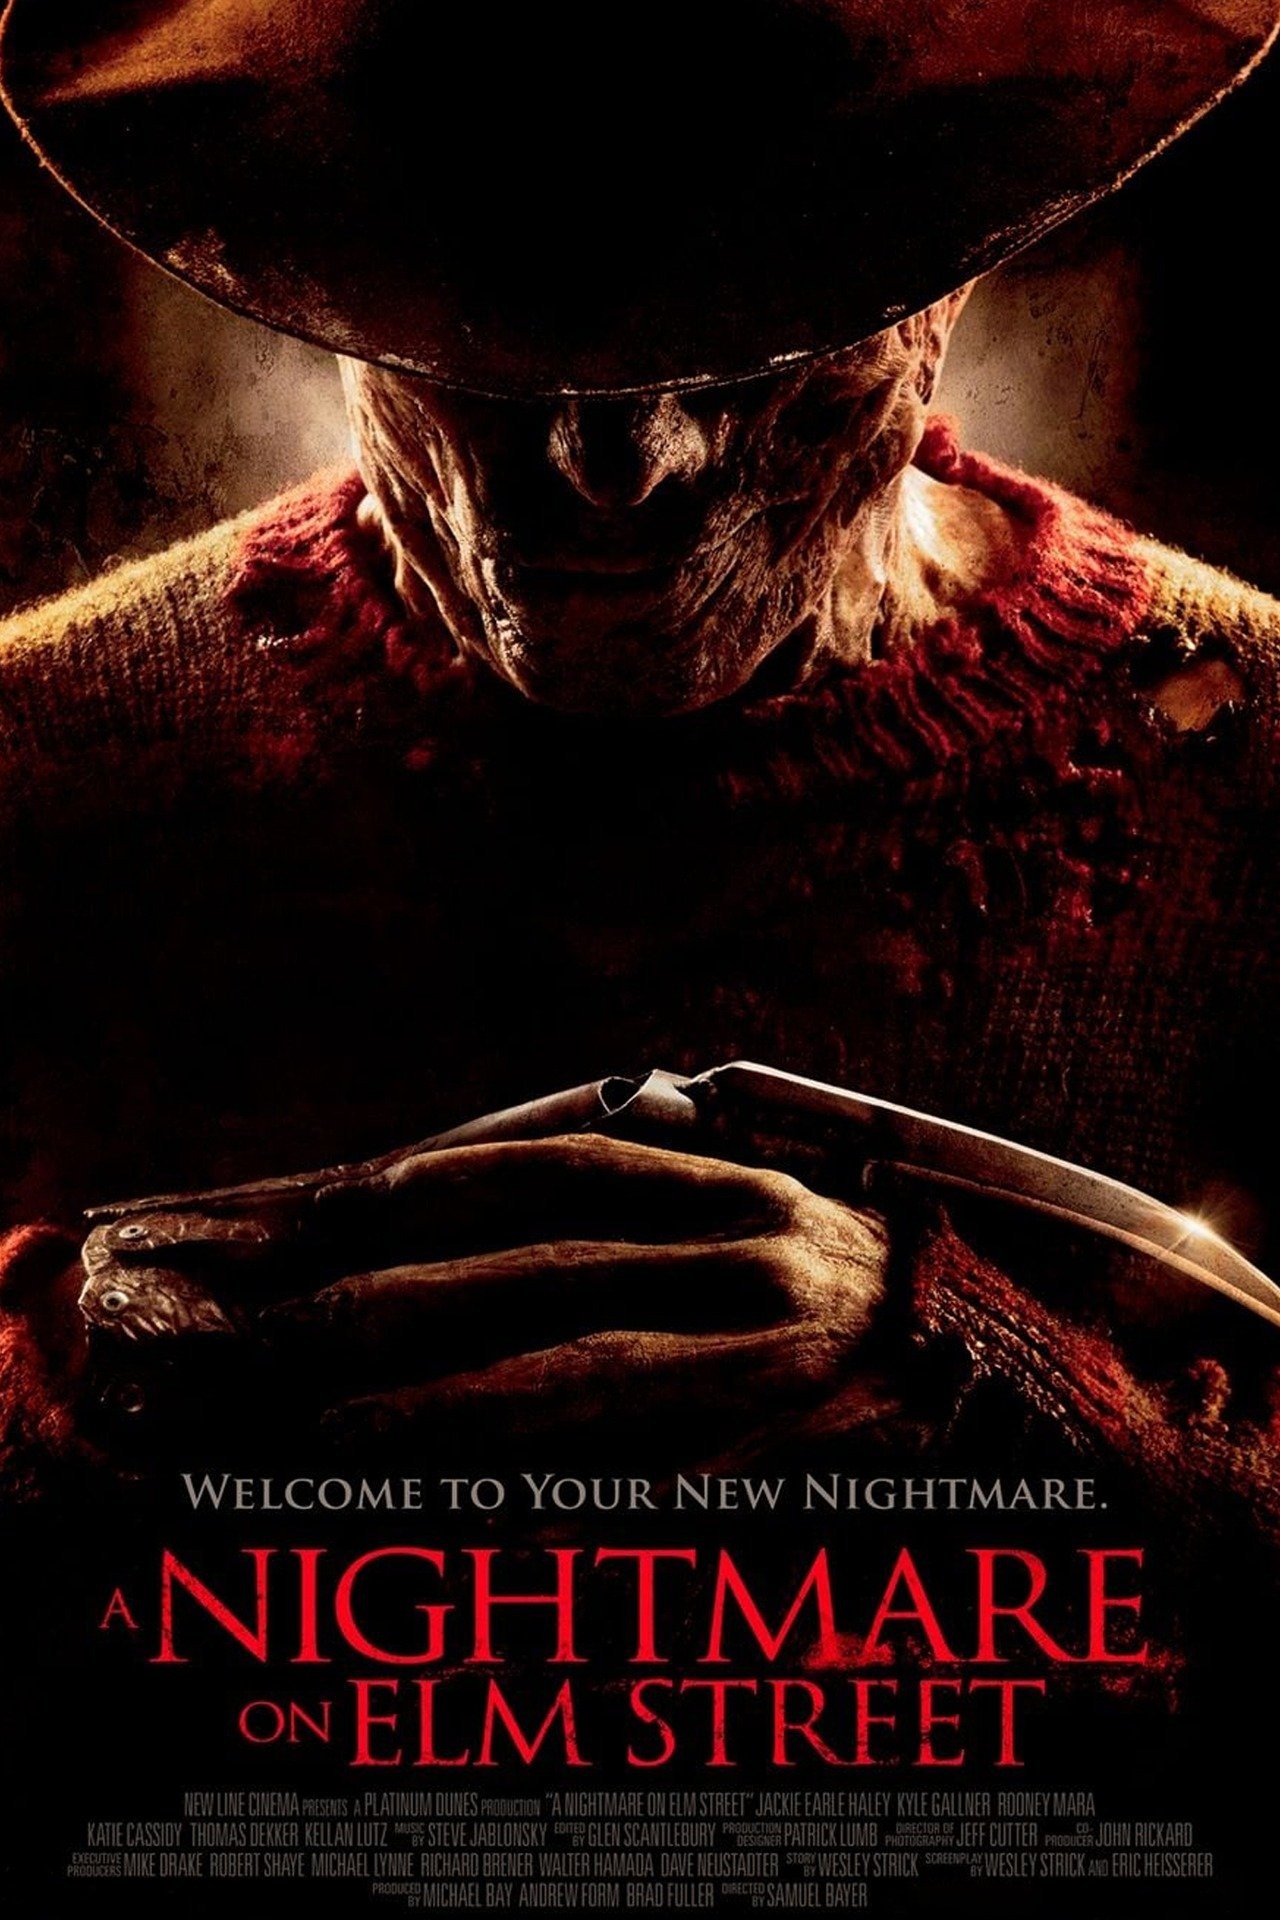 What's inside a Fall Guy? Nightmares. - One More Game